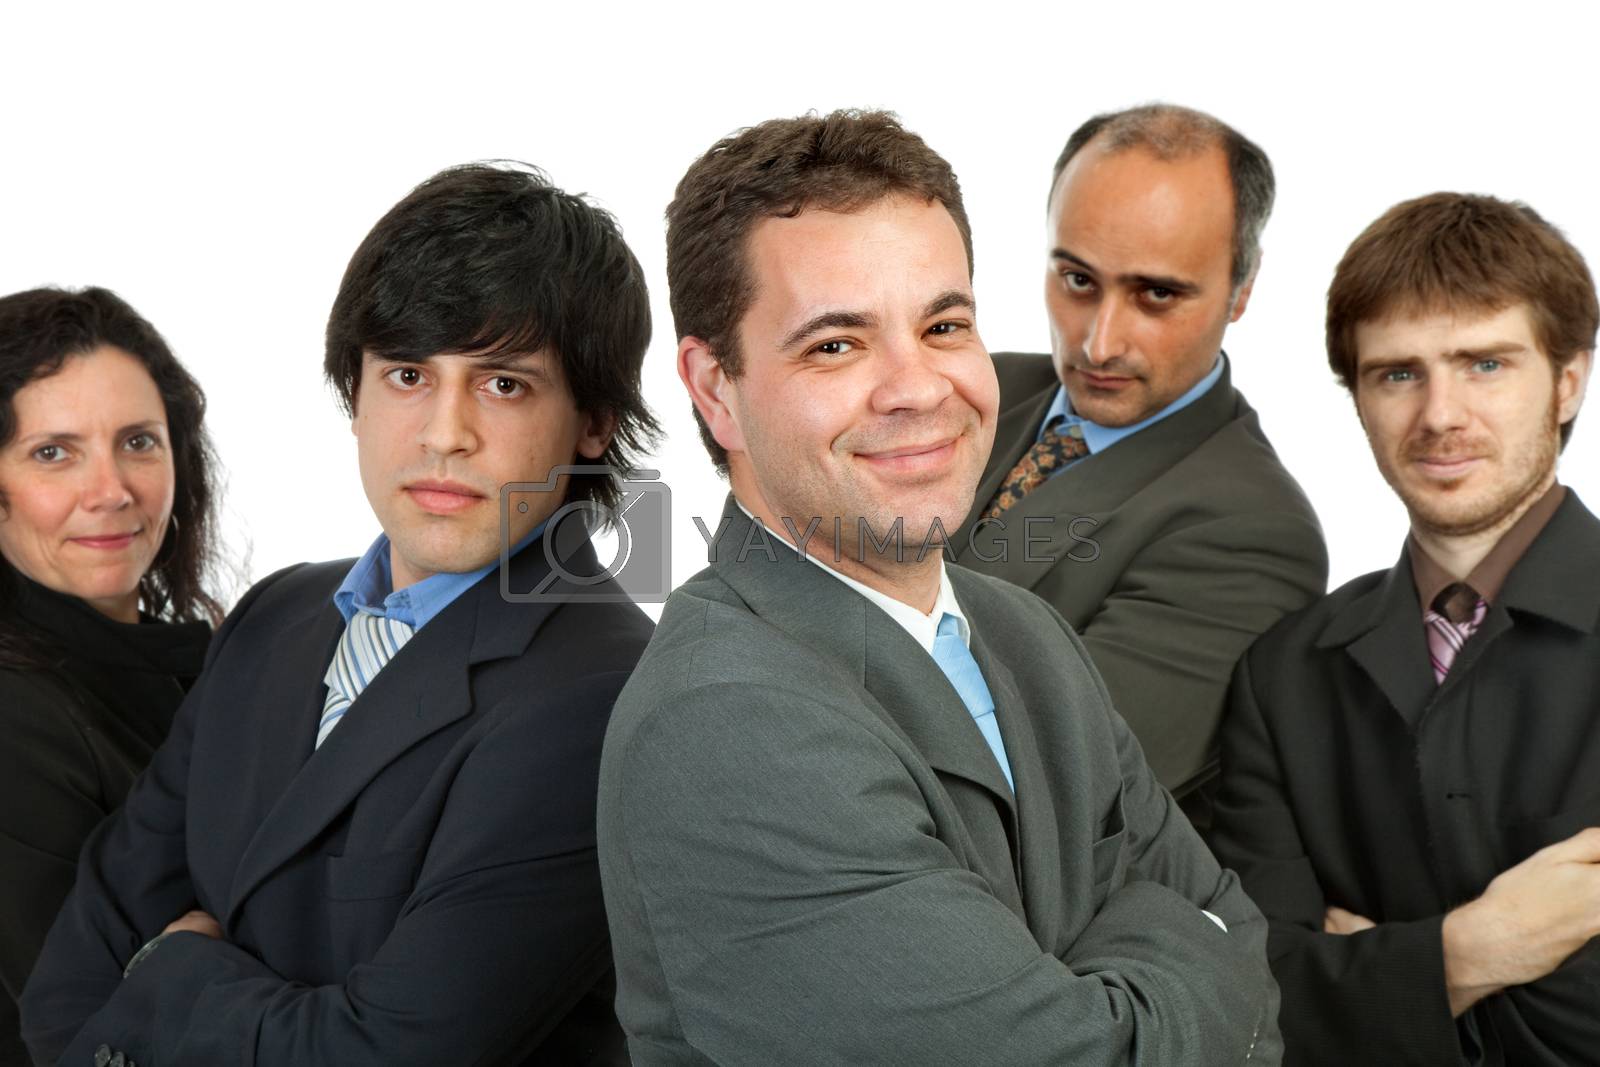 Royalty free image of business team by zittto